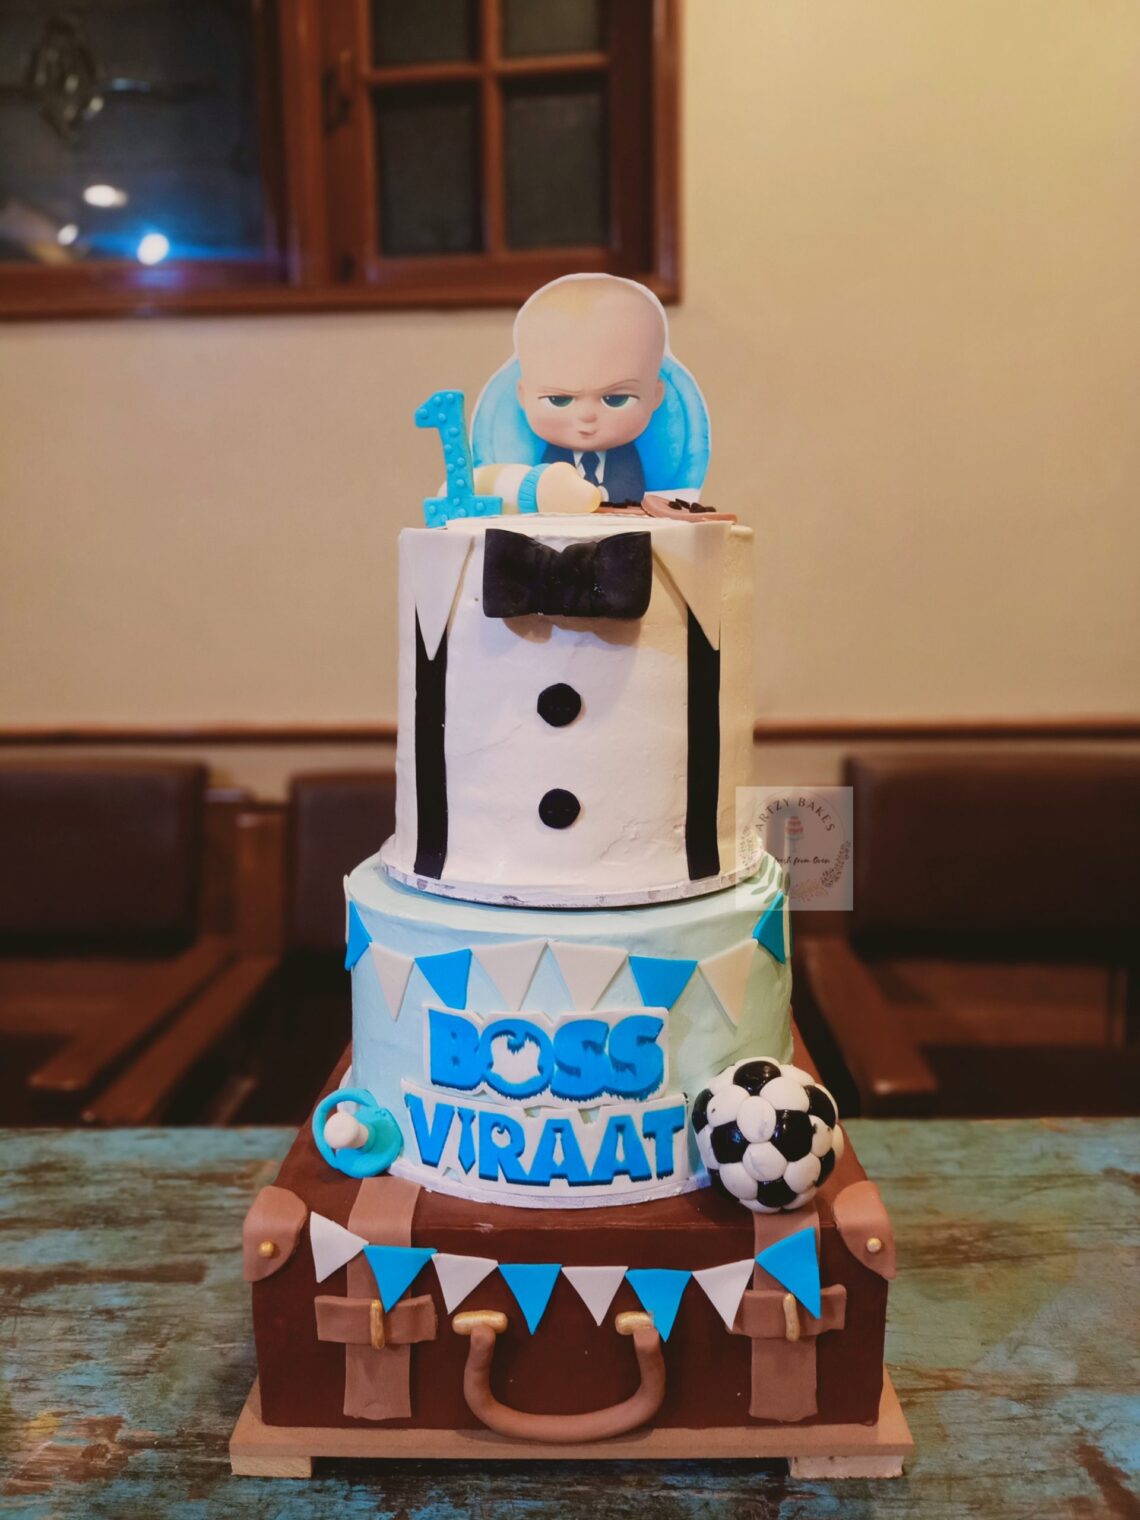 The Boss Baby Party Cakes (Credit: cakexpo)